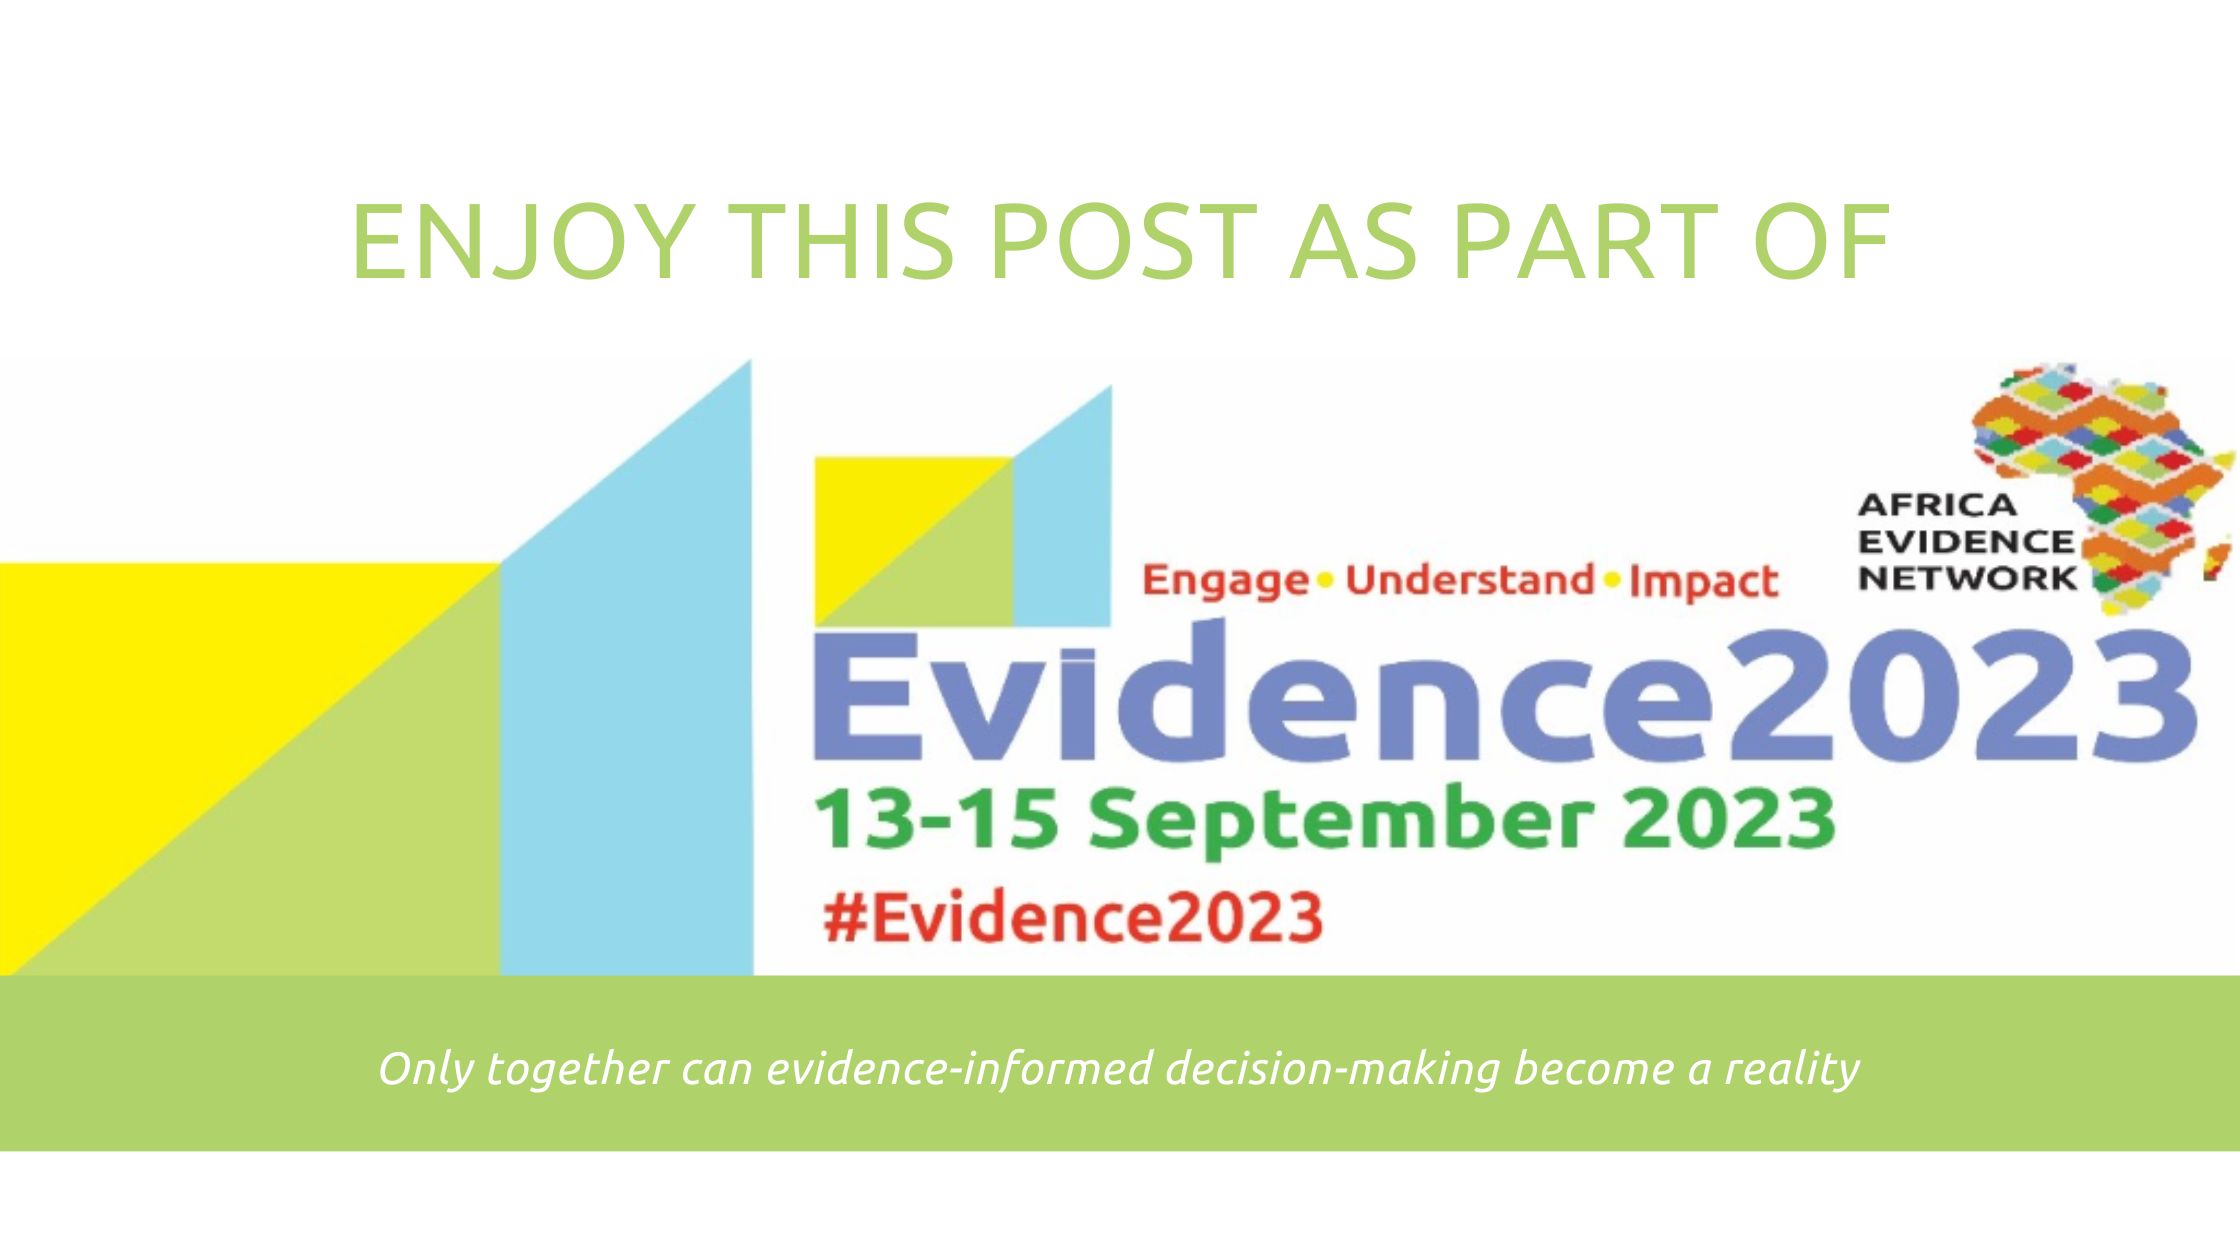 Session 13: The Art and Science of evidence use in Parliaments: An Insider’s story